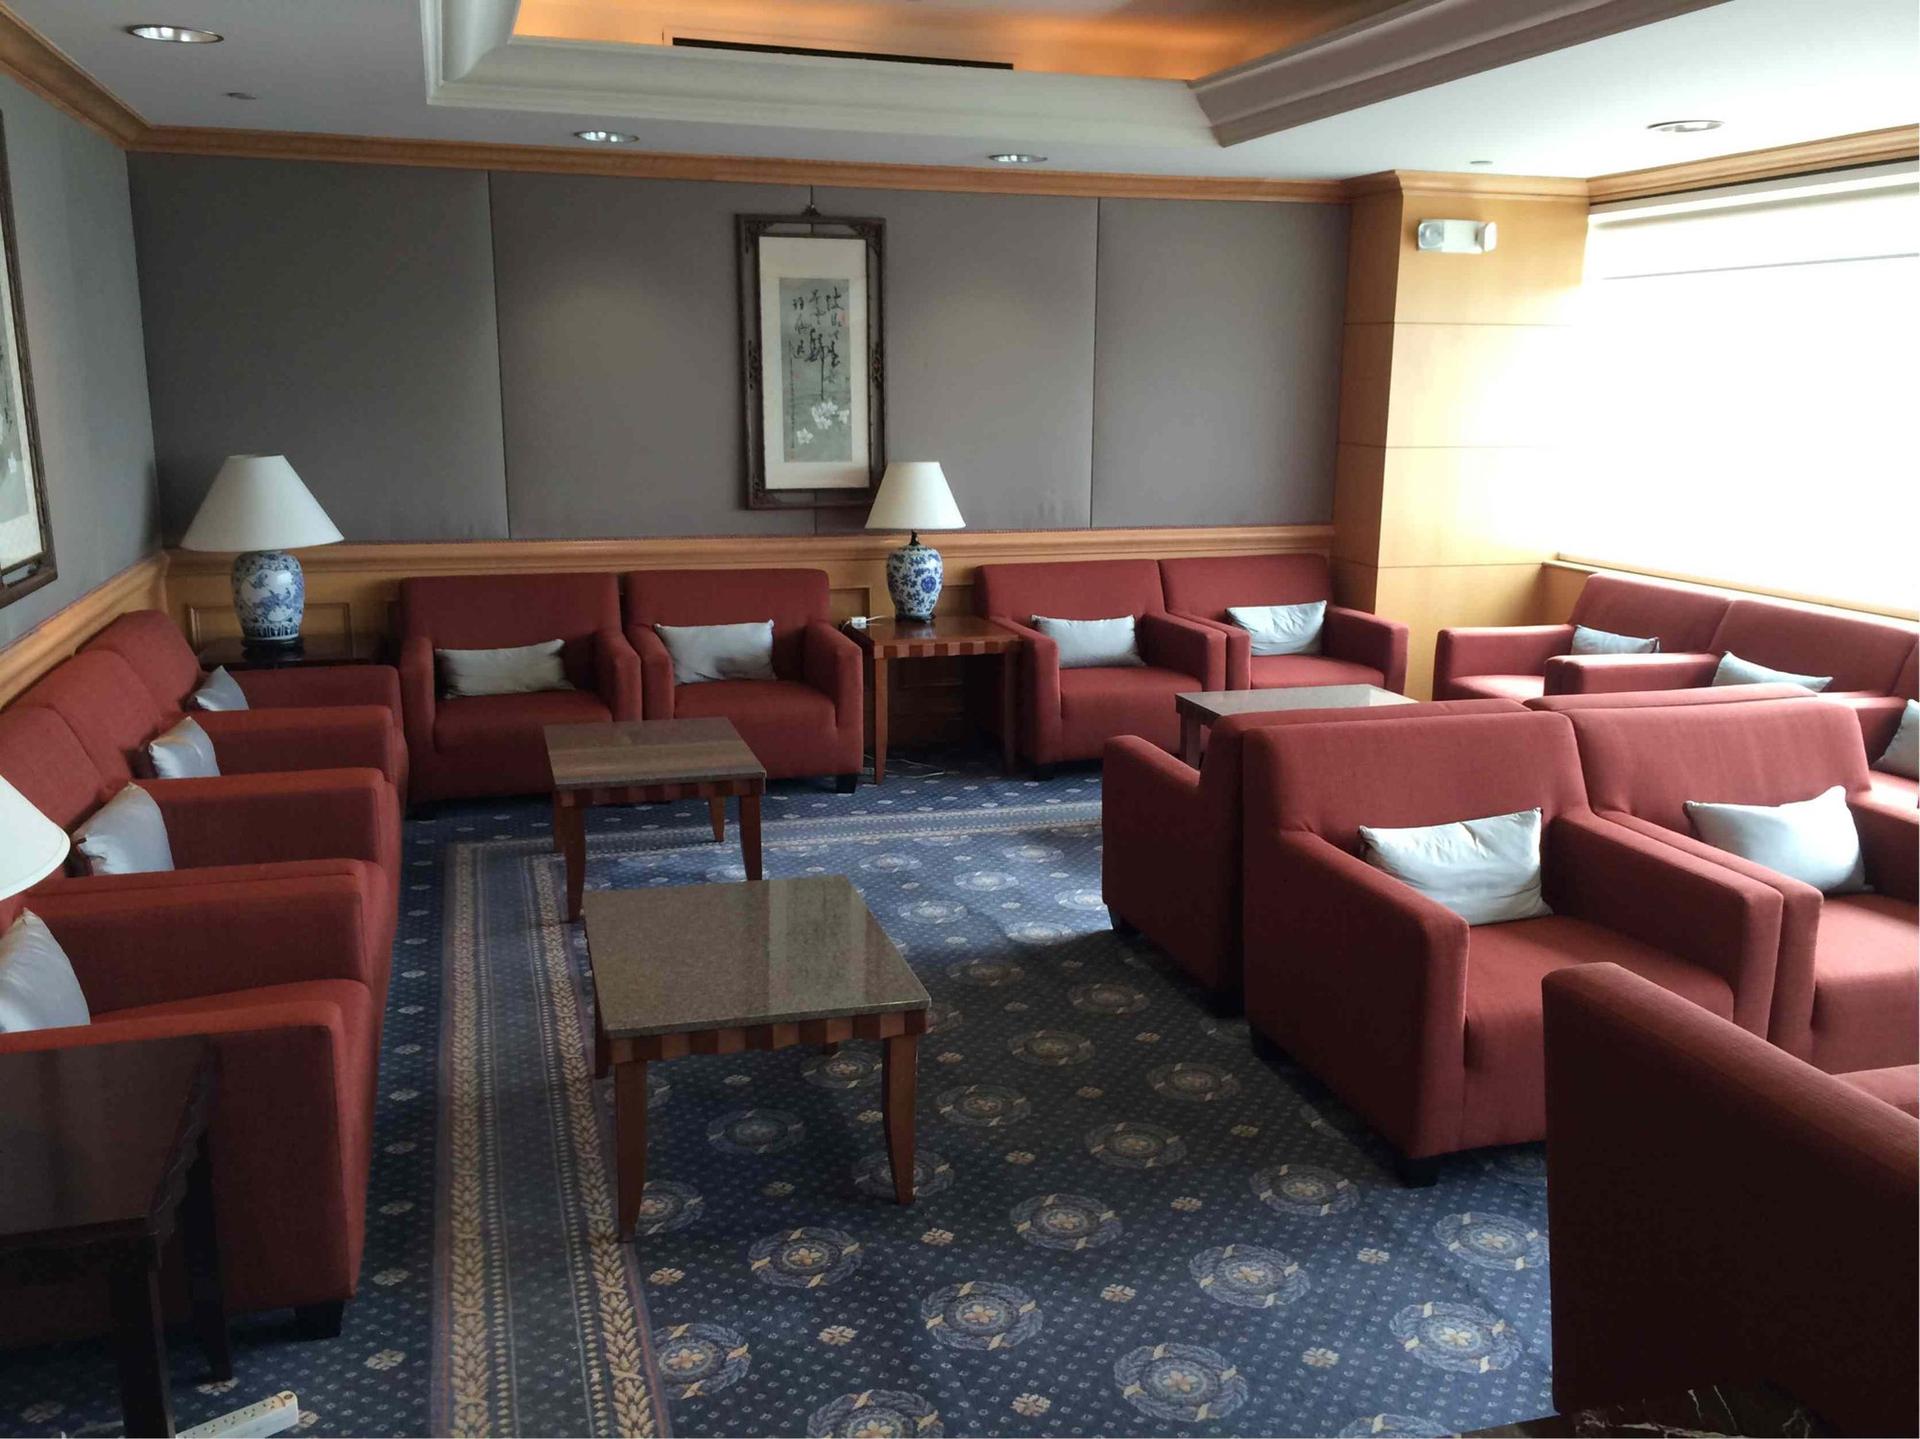 China Airlines Dynasty Lounge image 13 of 34